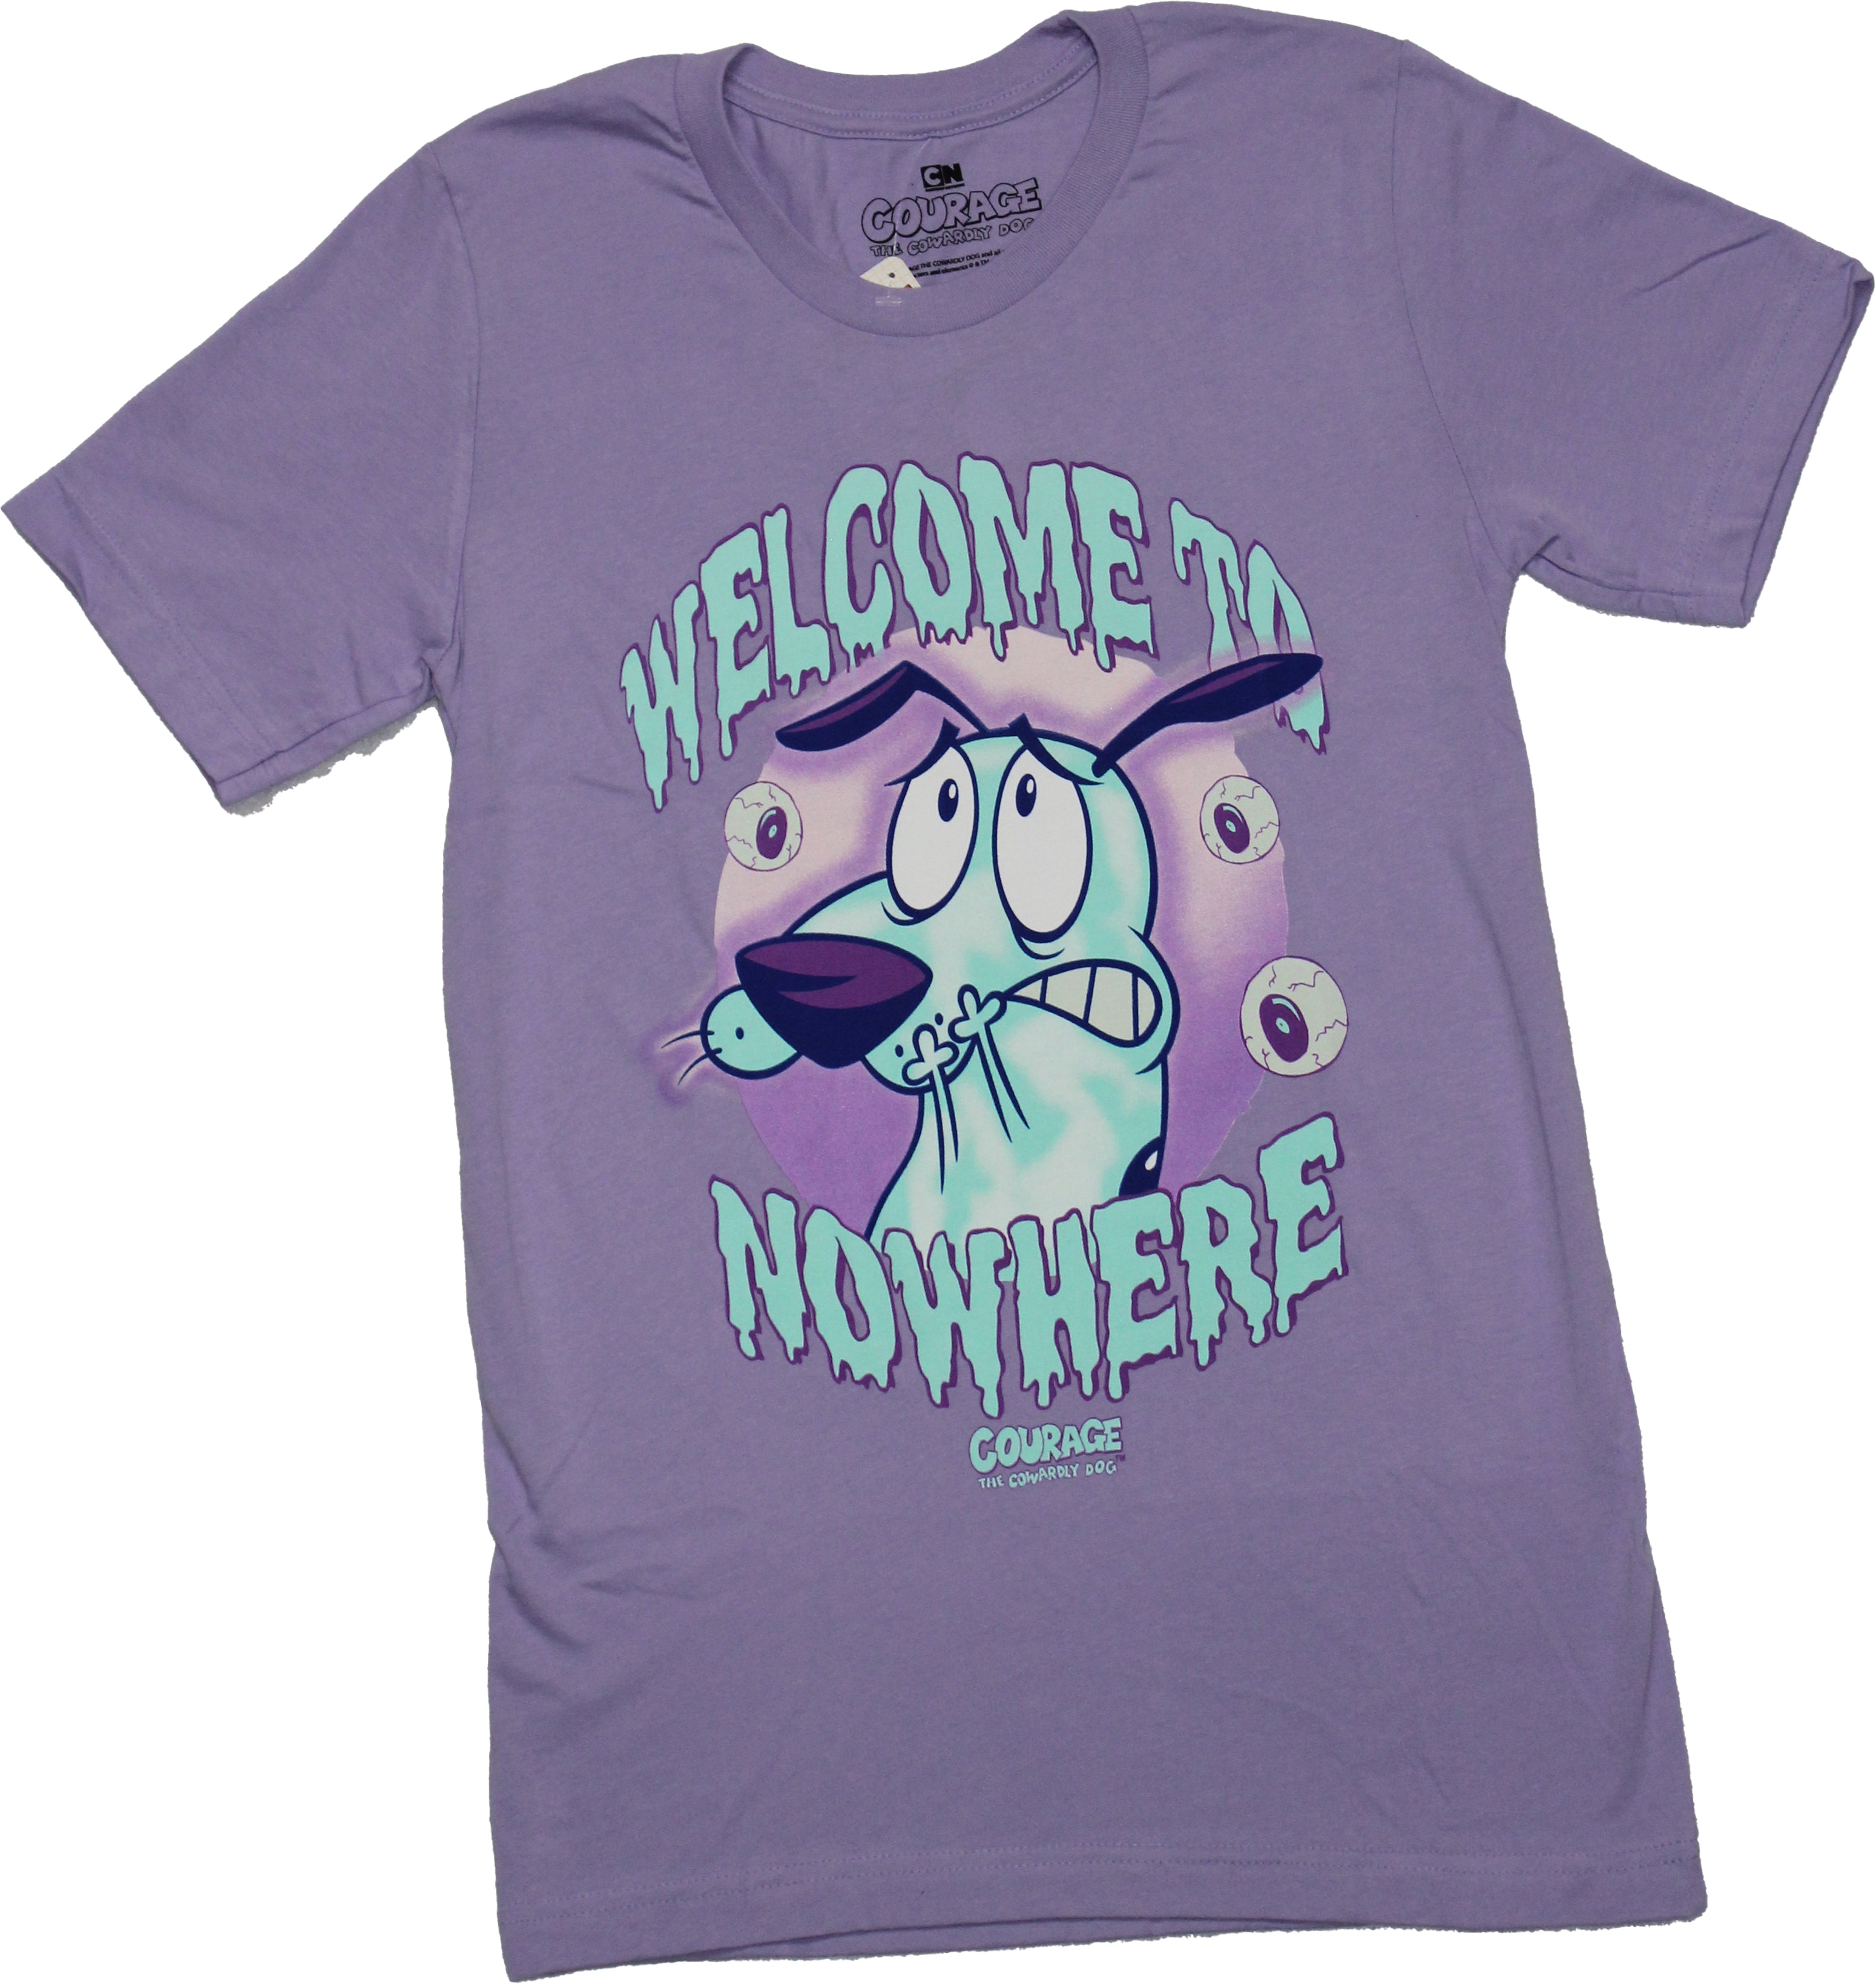 Courage the Cowardly Dog Mens T-Shirt - Welcome to Nowhere